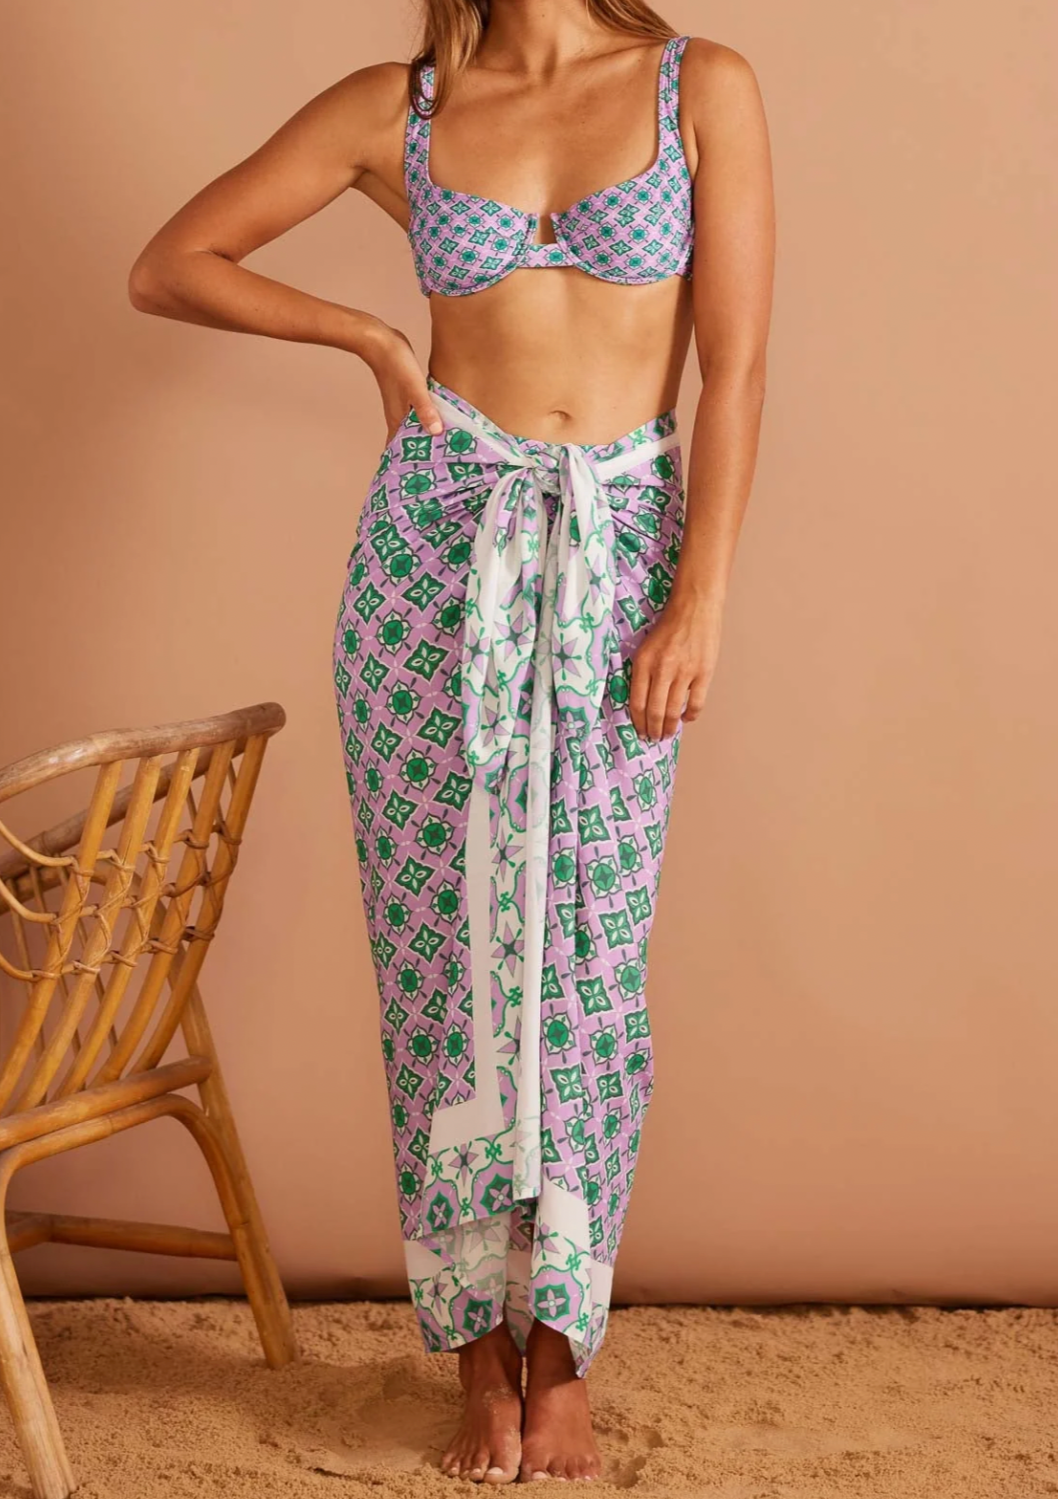 Verano Sarong, by MinkPink - Sarong in exclusive lilac geometric print. - Silky voile fabrication - Dimensions: 155cm L x 110cm W - Multi-way styling options - Designed in Sydney, Australia